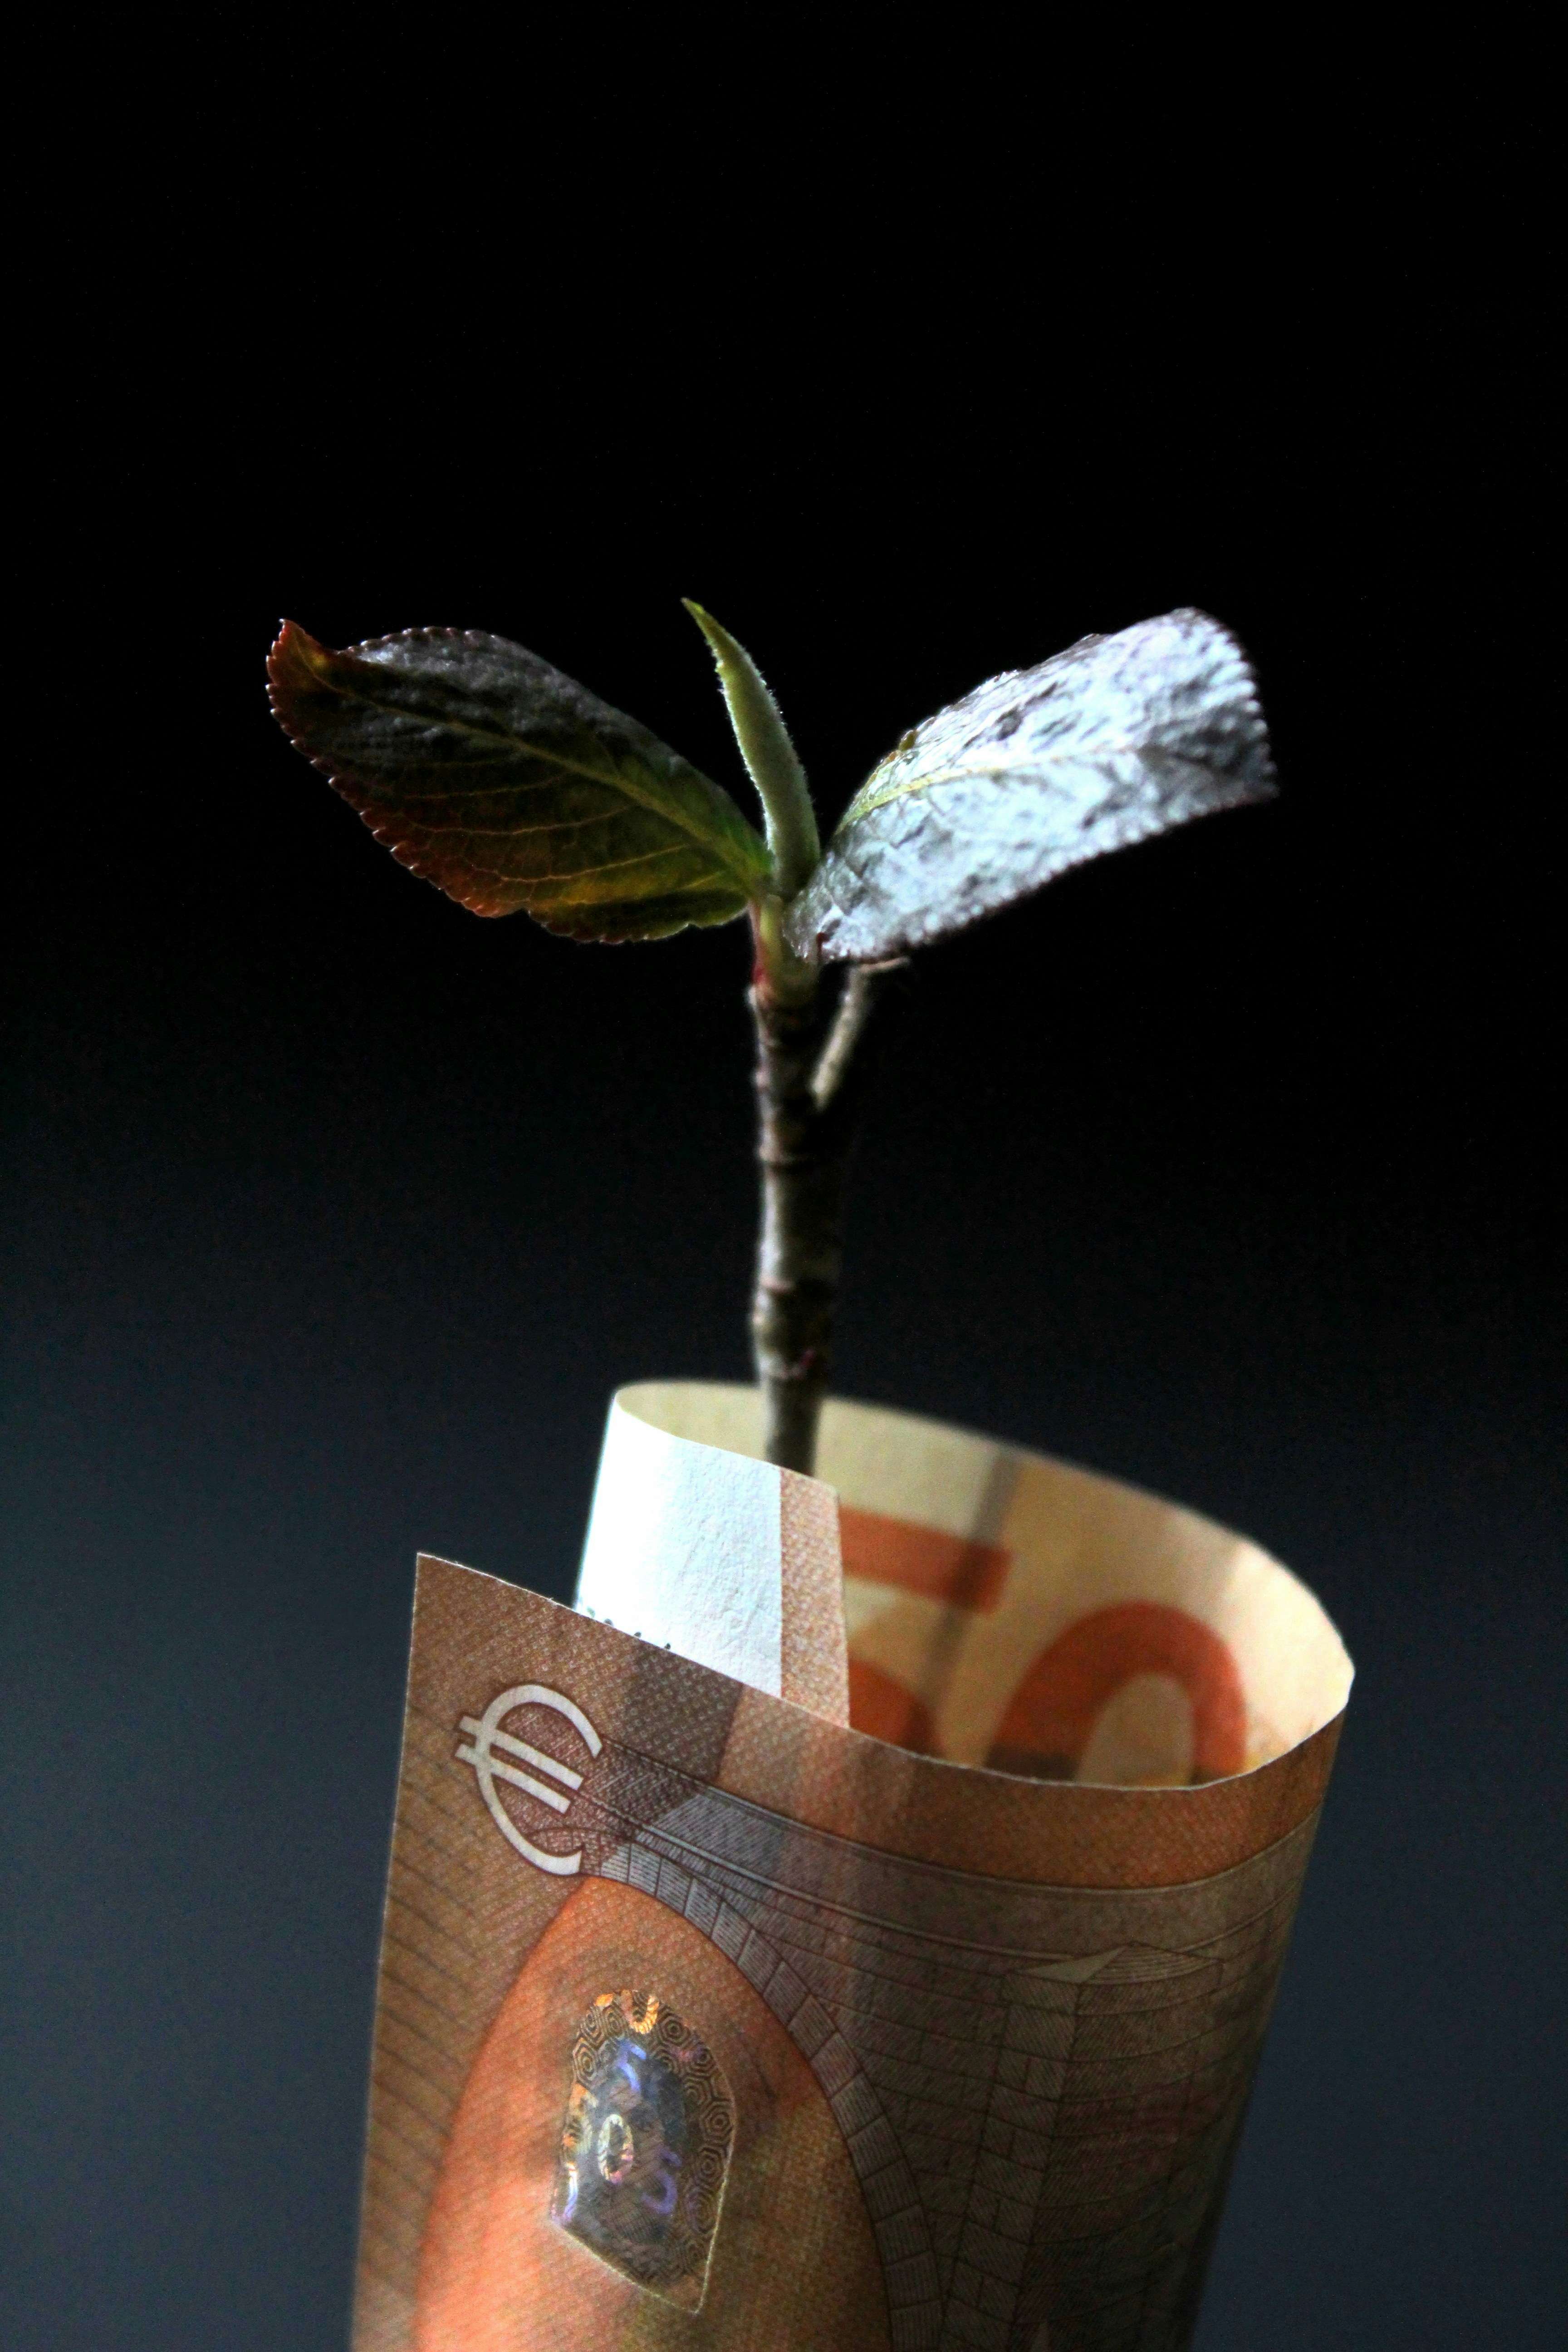 plant grow in currency note